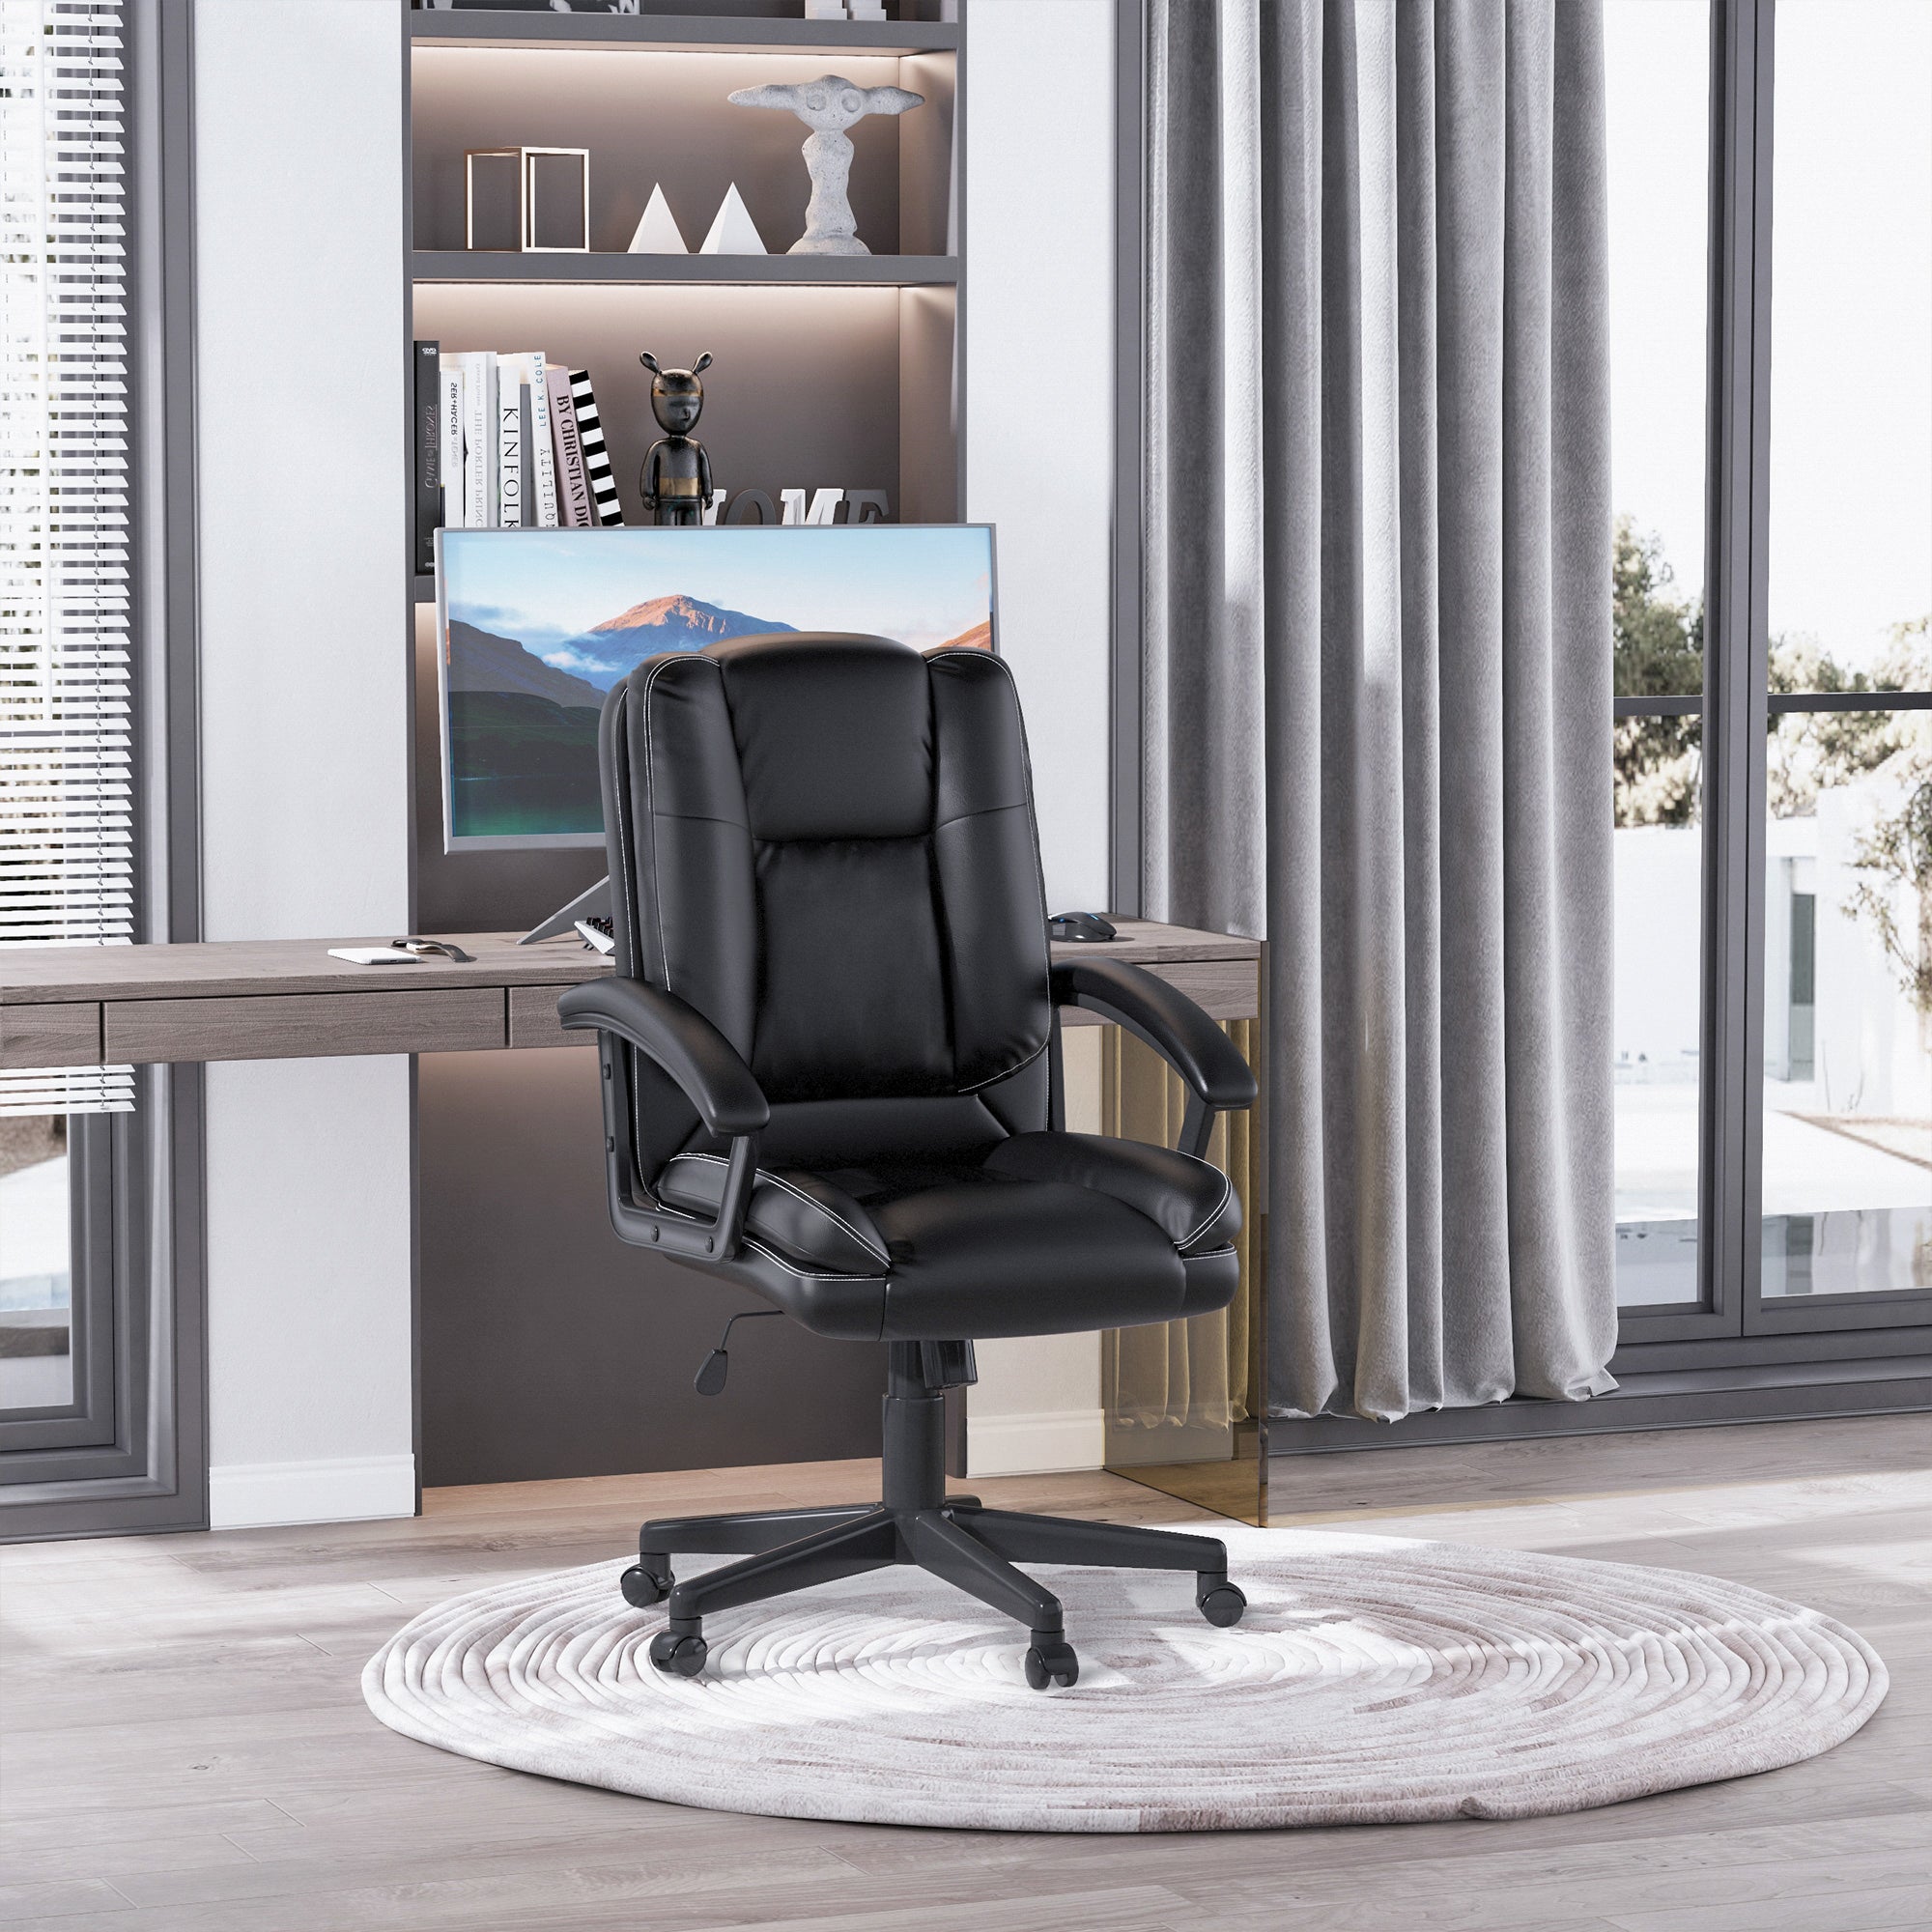 Swivel Executive Office Chair Mid Back Faux Leather Computer Desk Chair for Home with Double-Tier Padding, Arm, Wheels, Black-1